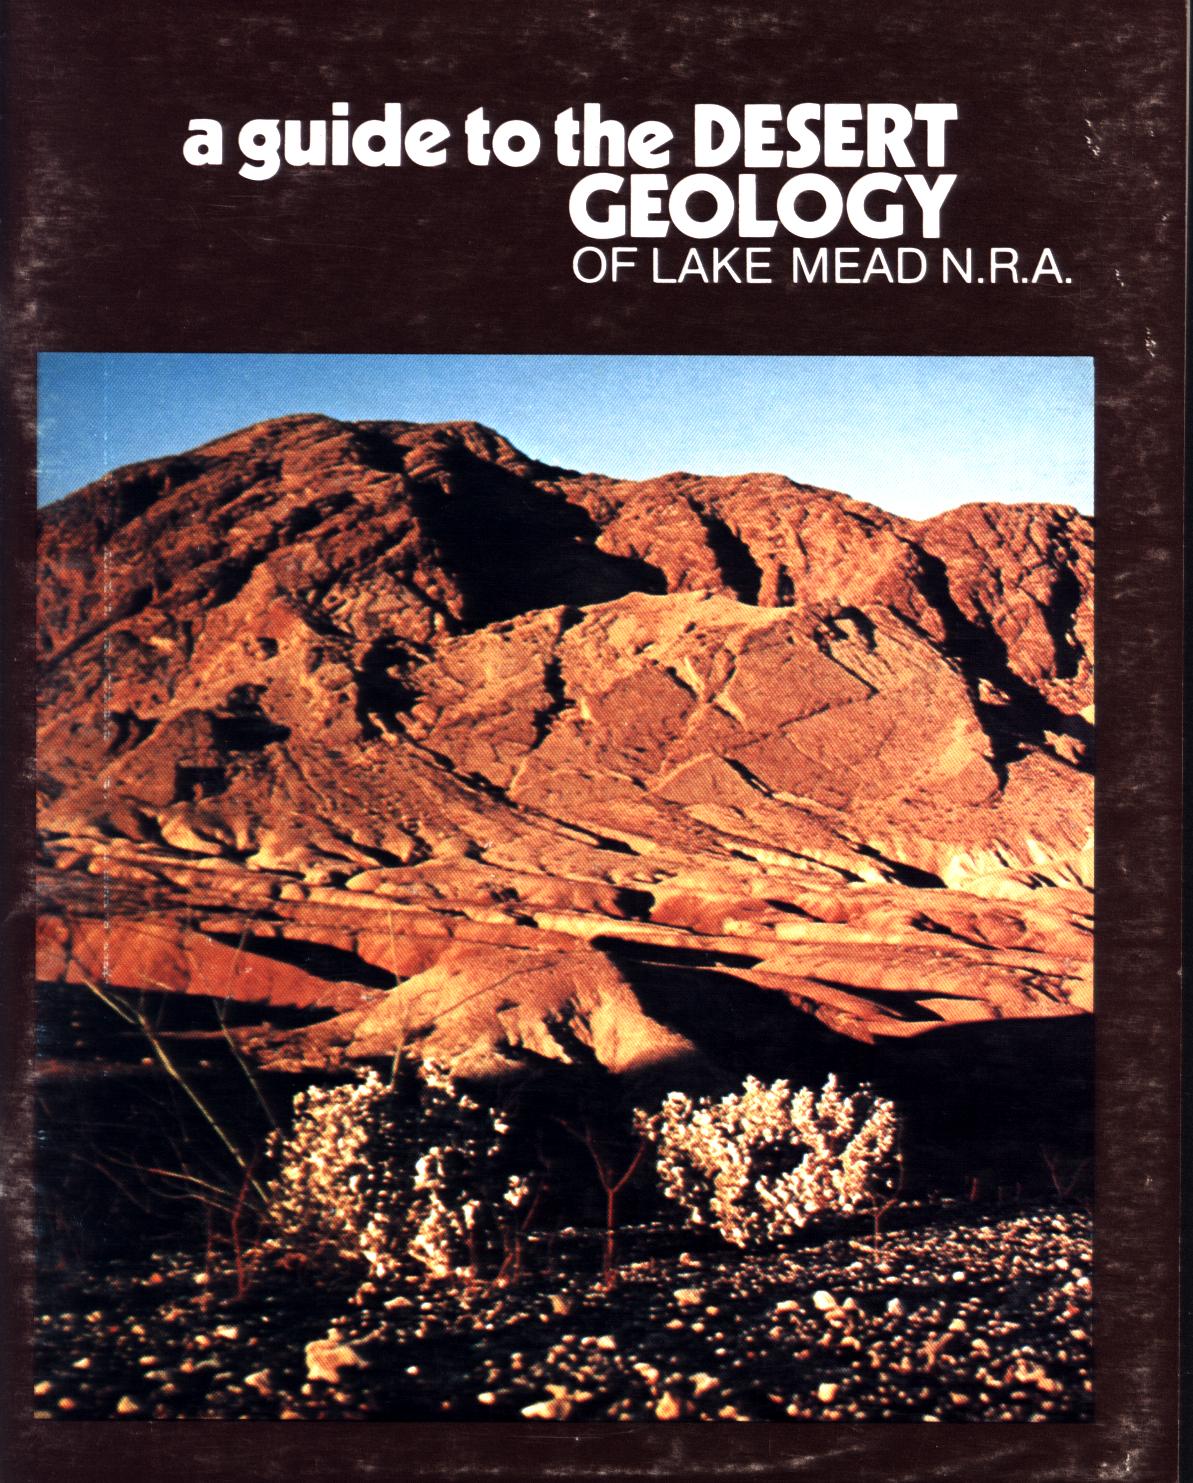 A GUIDE TO THE DESERT GEOLOGY OF LAKE MEAD NATIONAL RECREATION AREA (AZ/NV).